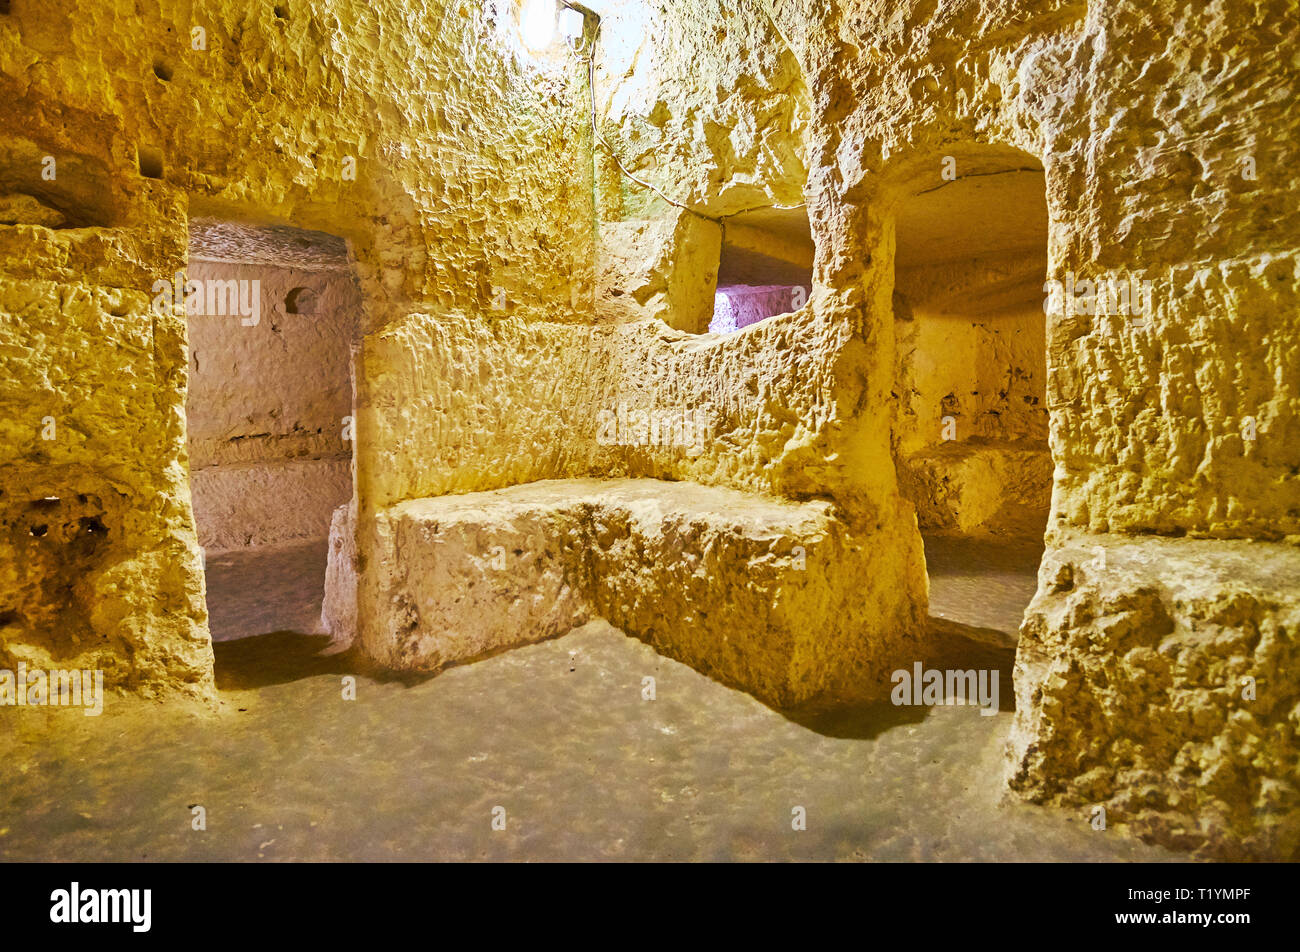 RABAT, MALTA - JUNE 16, 2018: The stone tunnel with shelters for people is the landmark, preserved  in Wignacourt Residence, it was in use during the  Stock Photo